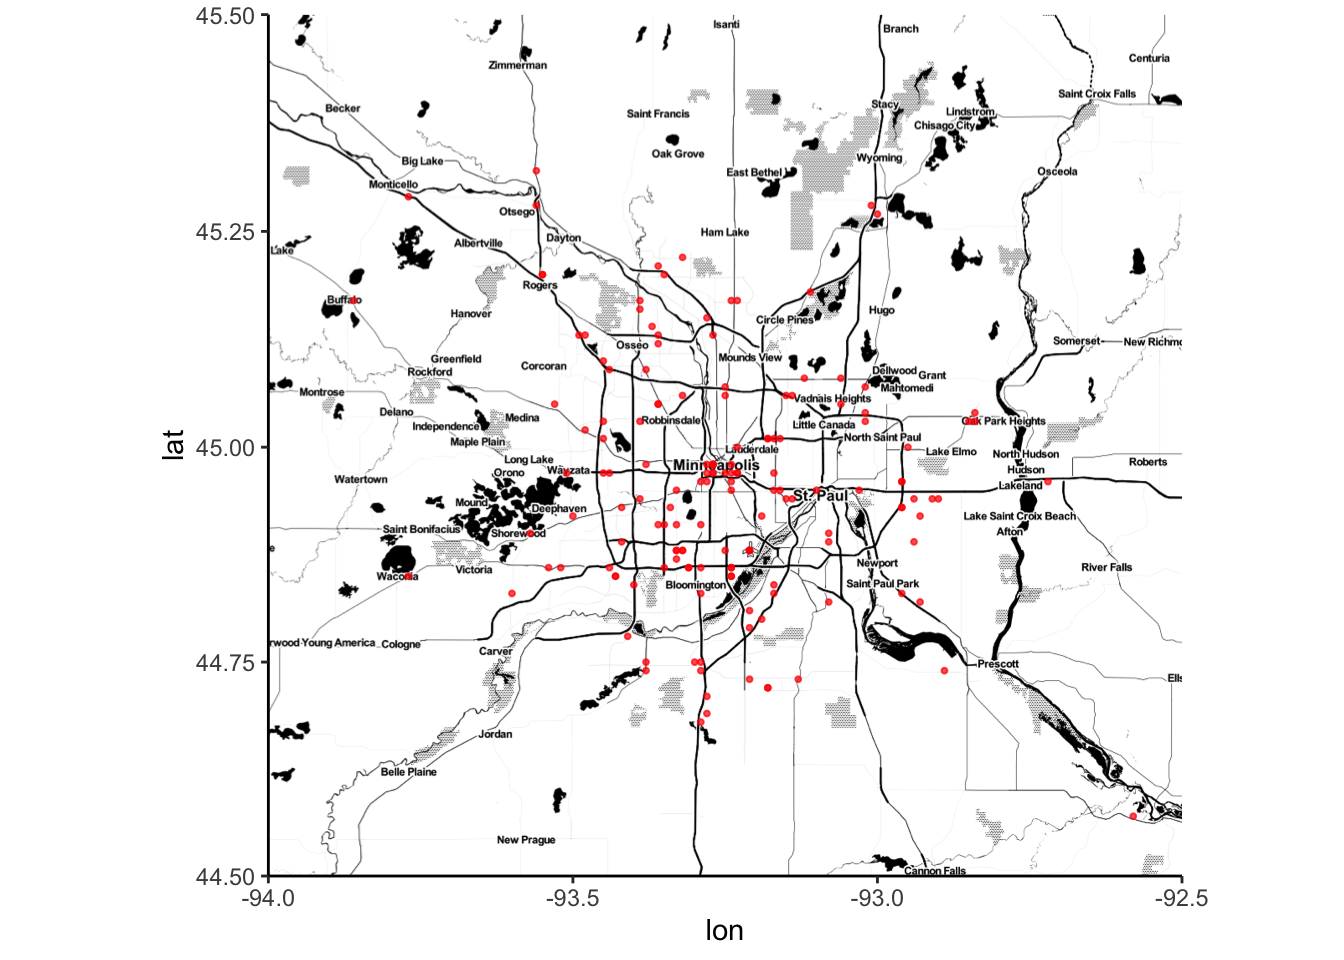 Map of Starbucks locations in the Twin Cities. Most locations are in the city centers or along major highways.